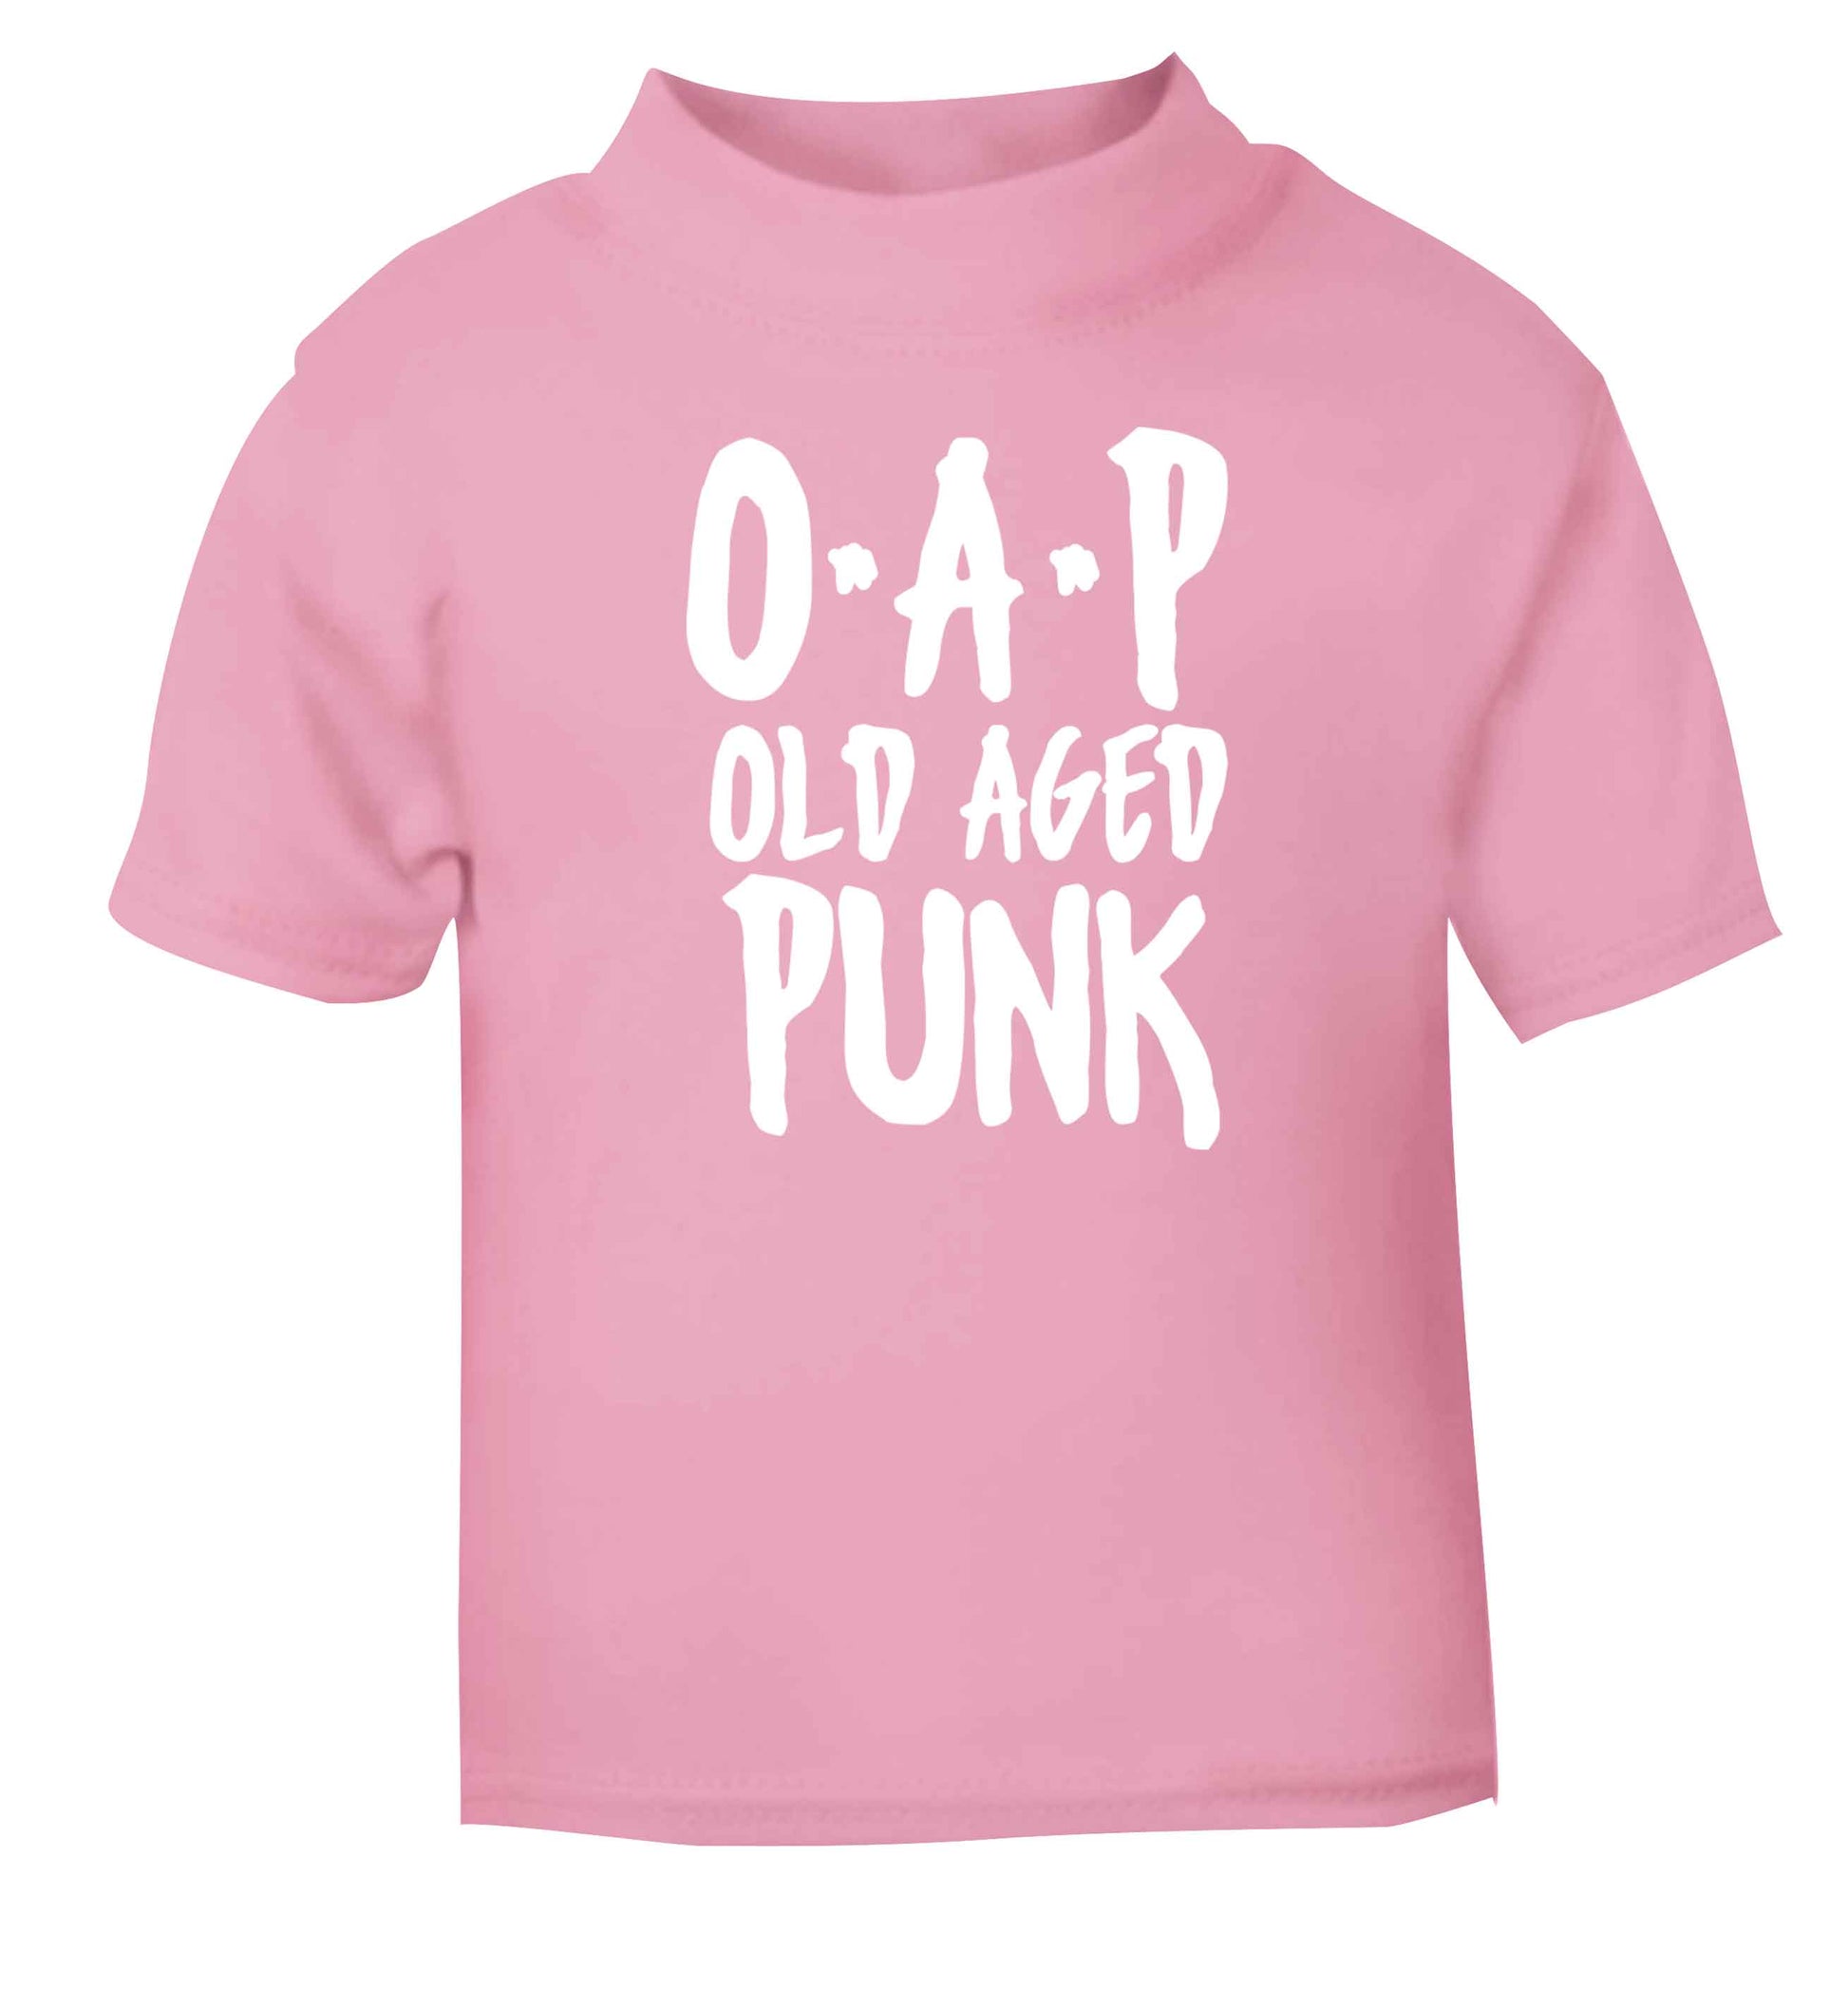 O.A.P Old Age Punk light pink Baby Toddler Tshirt 2 Years